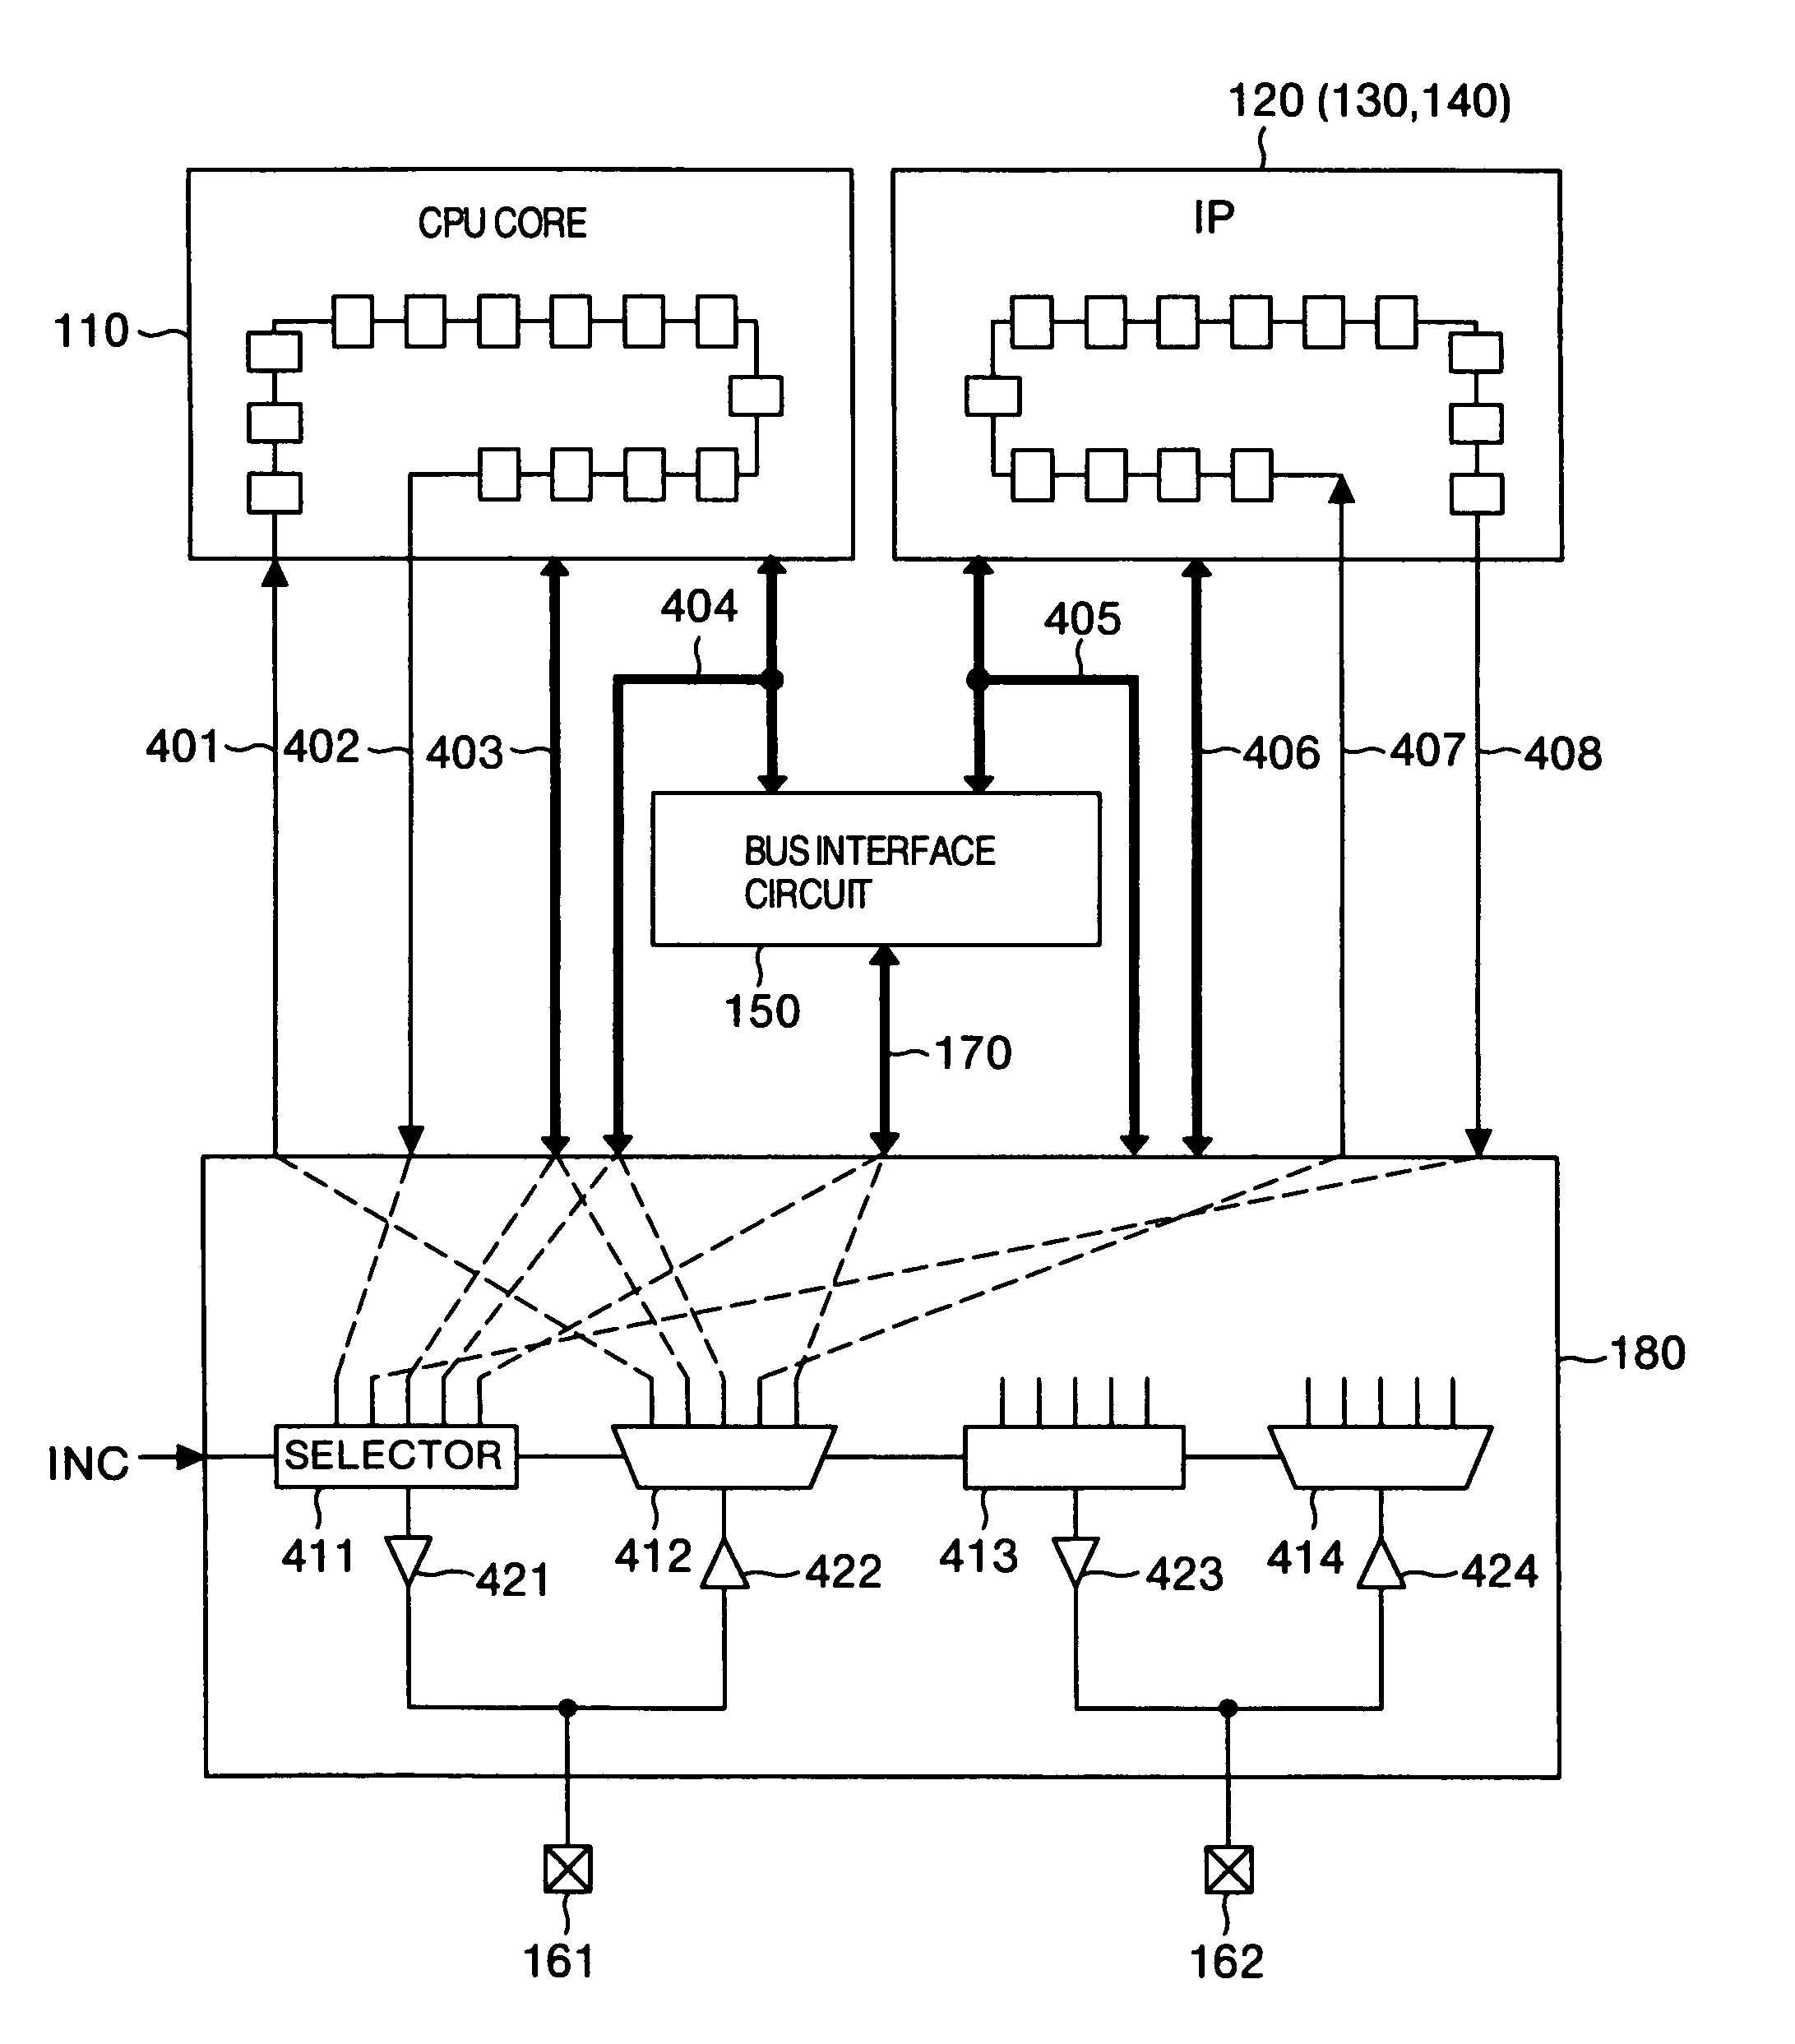 IC with internal interface switch for testability